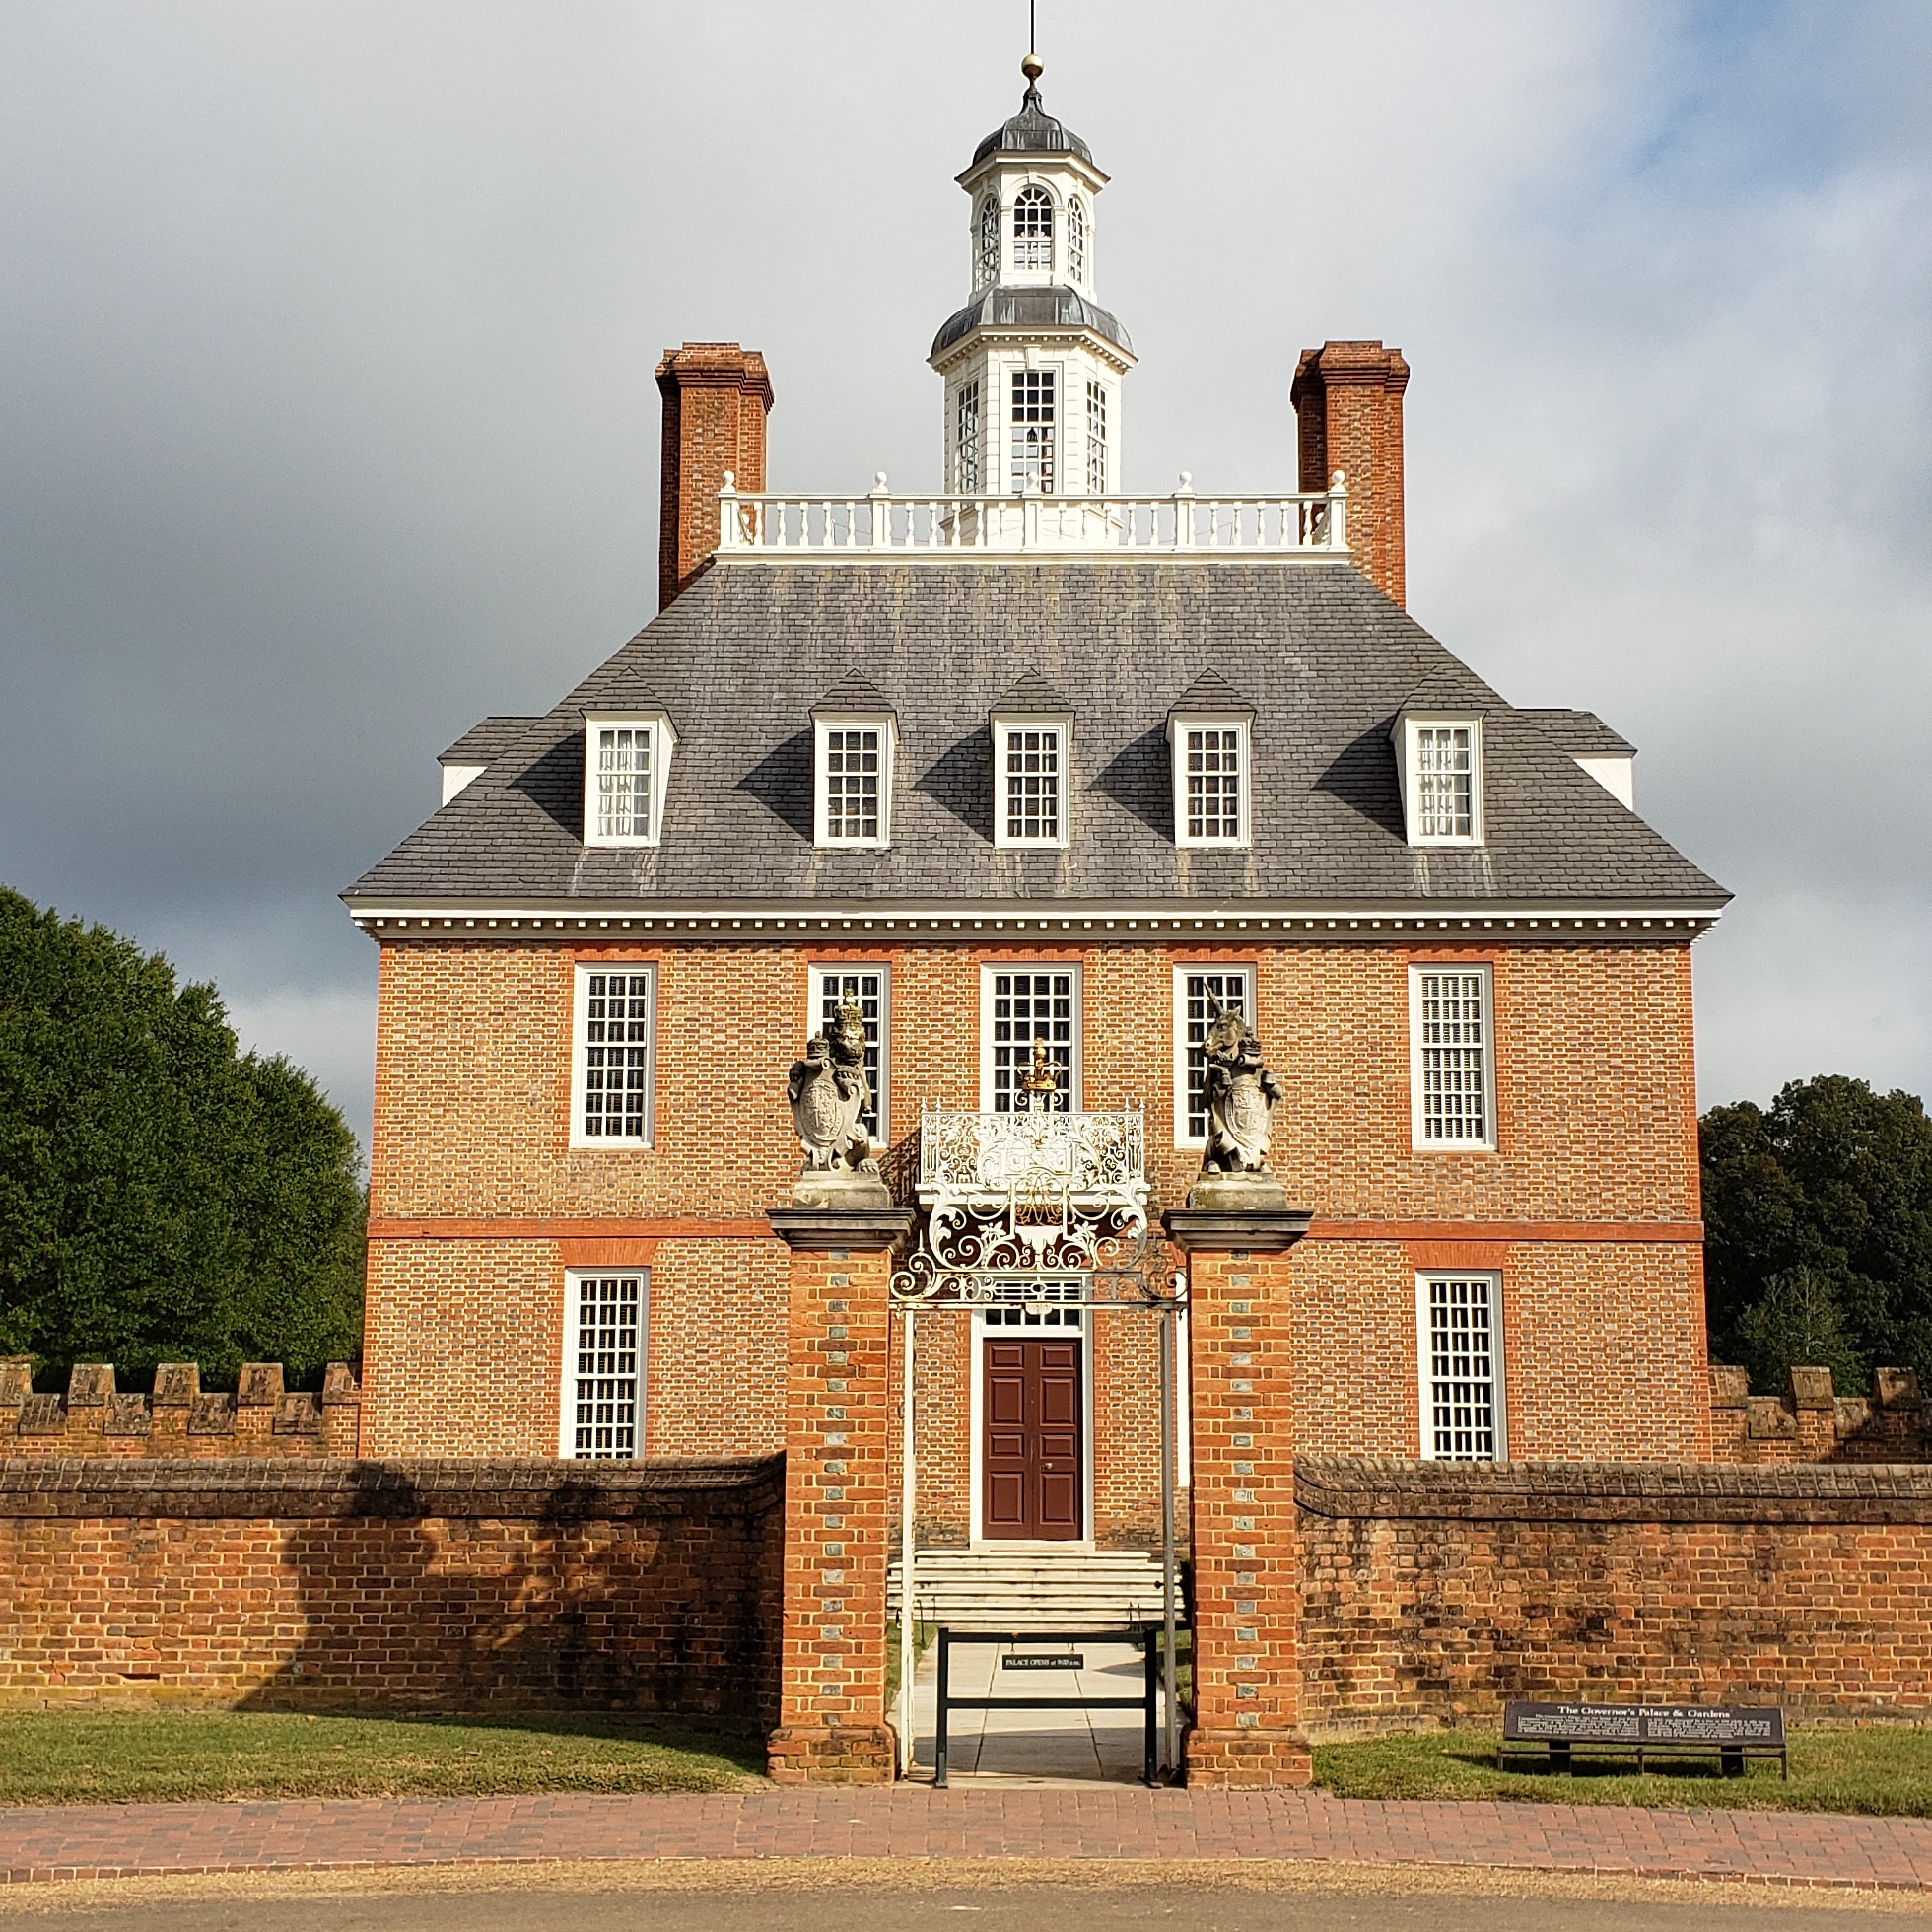 “To feed the human spirit” – Colonial Williamsburg